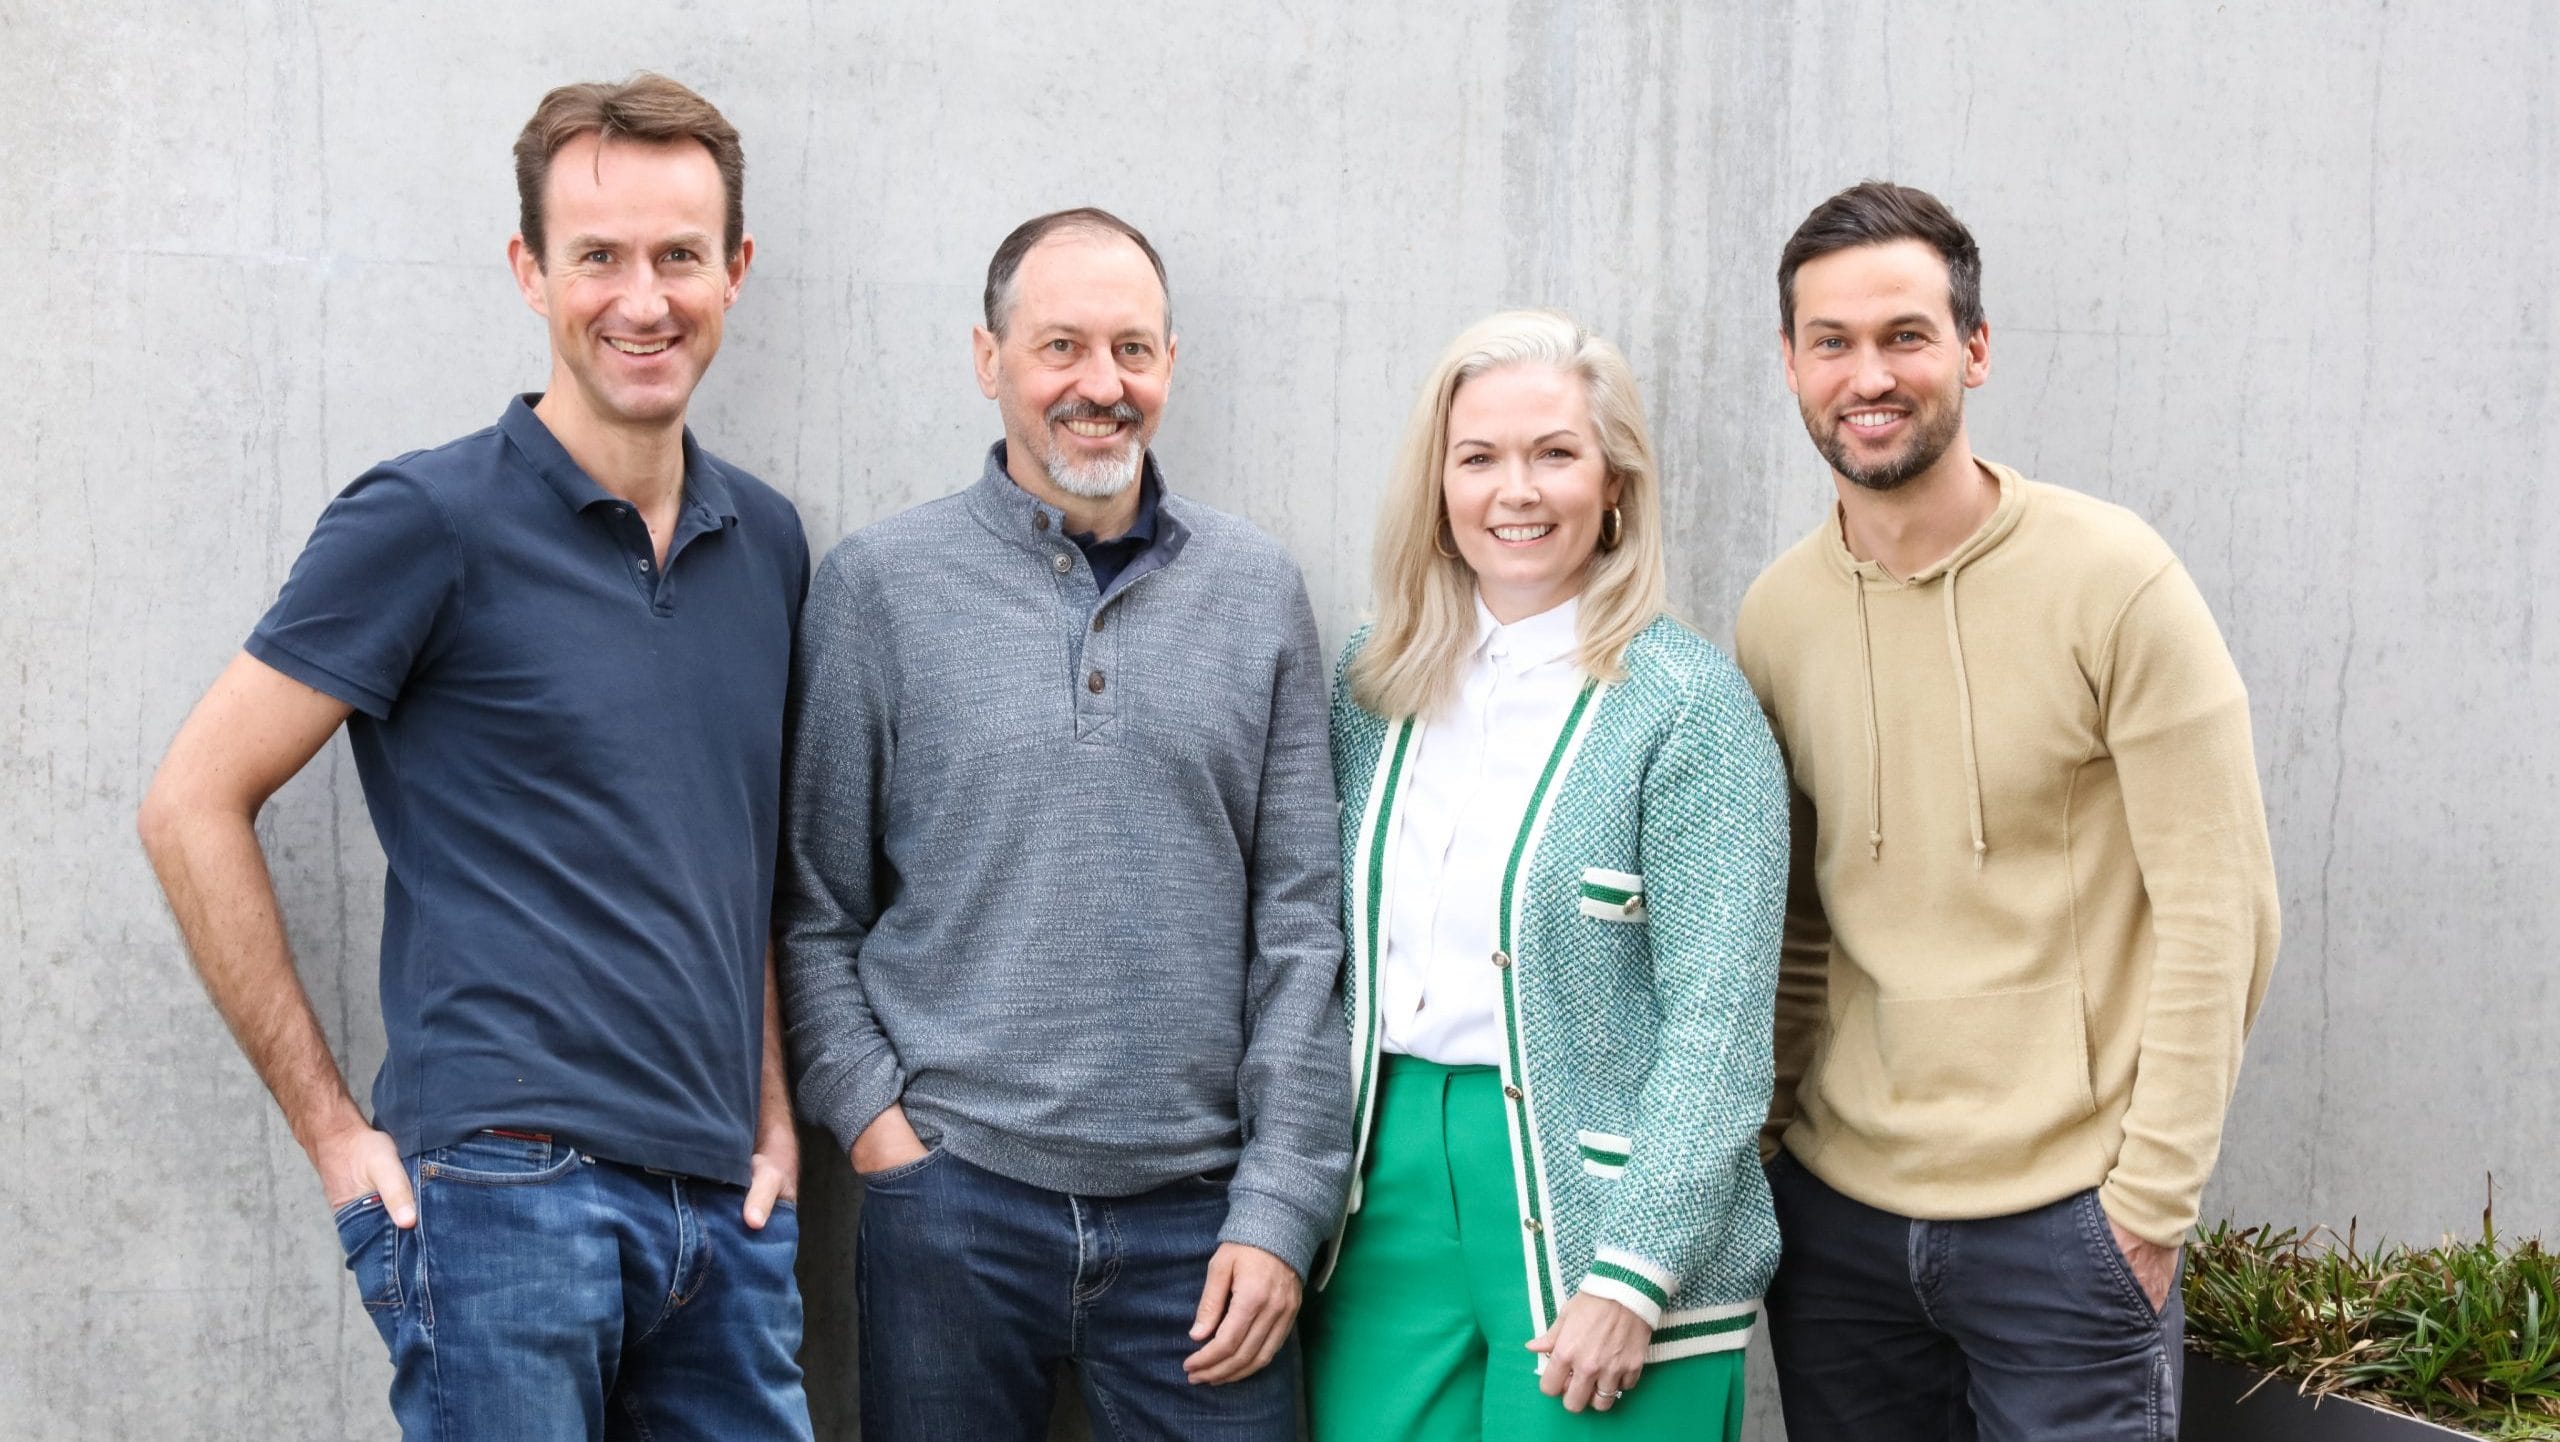 Group Photo - Bernd Klosterkemper, Florian Erber, Zoe Peden, and Johannes Weber, the partners at Ananda Impact Ventures, showcasing the team behind innovative impact investments